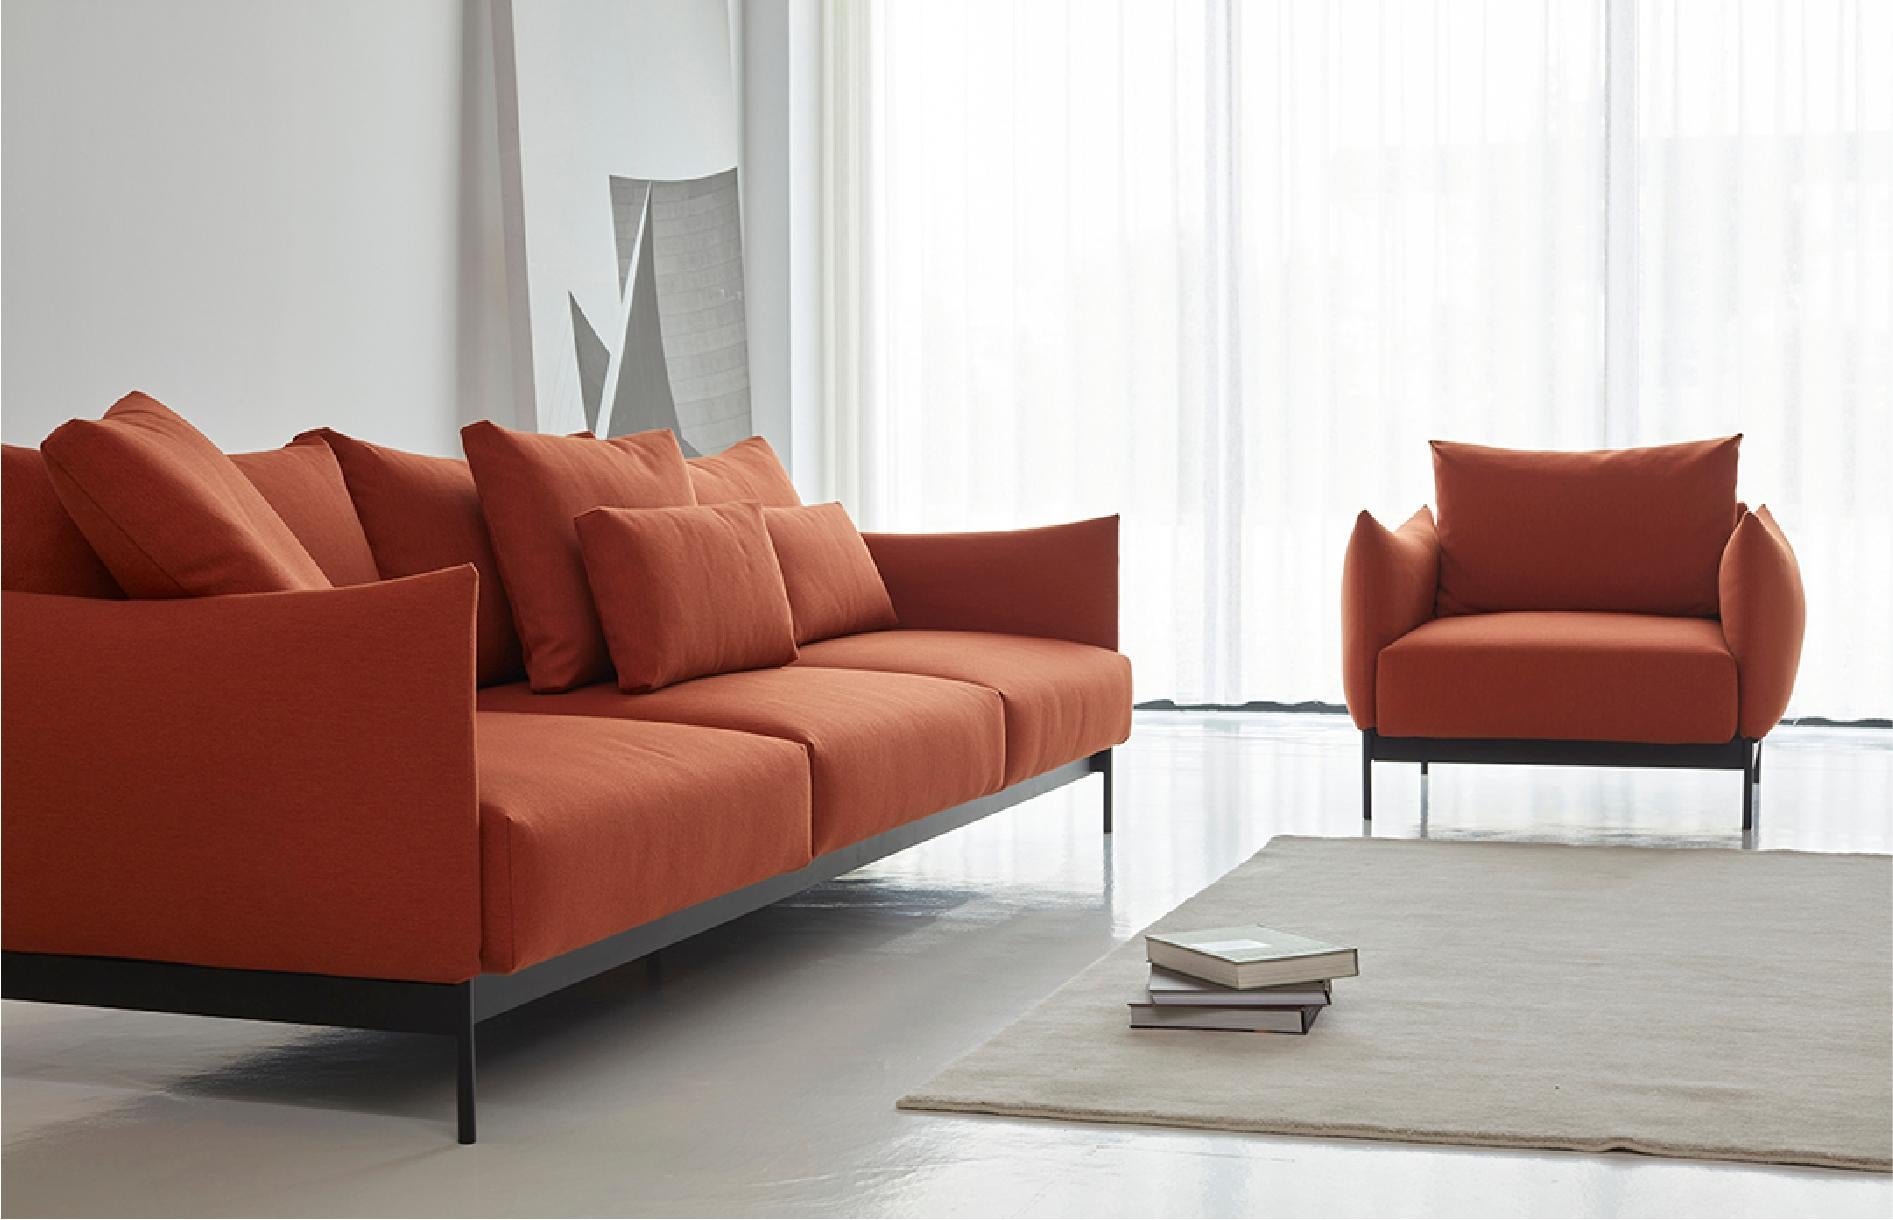 The Leyi 3 Seater Sofa embodies sustainable design principles with its contemporary elegance. This meaningful OEM product offers practicality and exceptional comfort, ensuring a long life-cycle. Its removable and washable covers facilitate